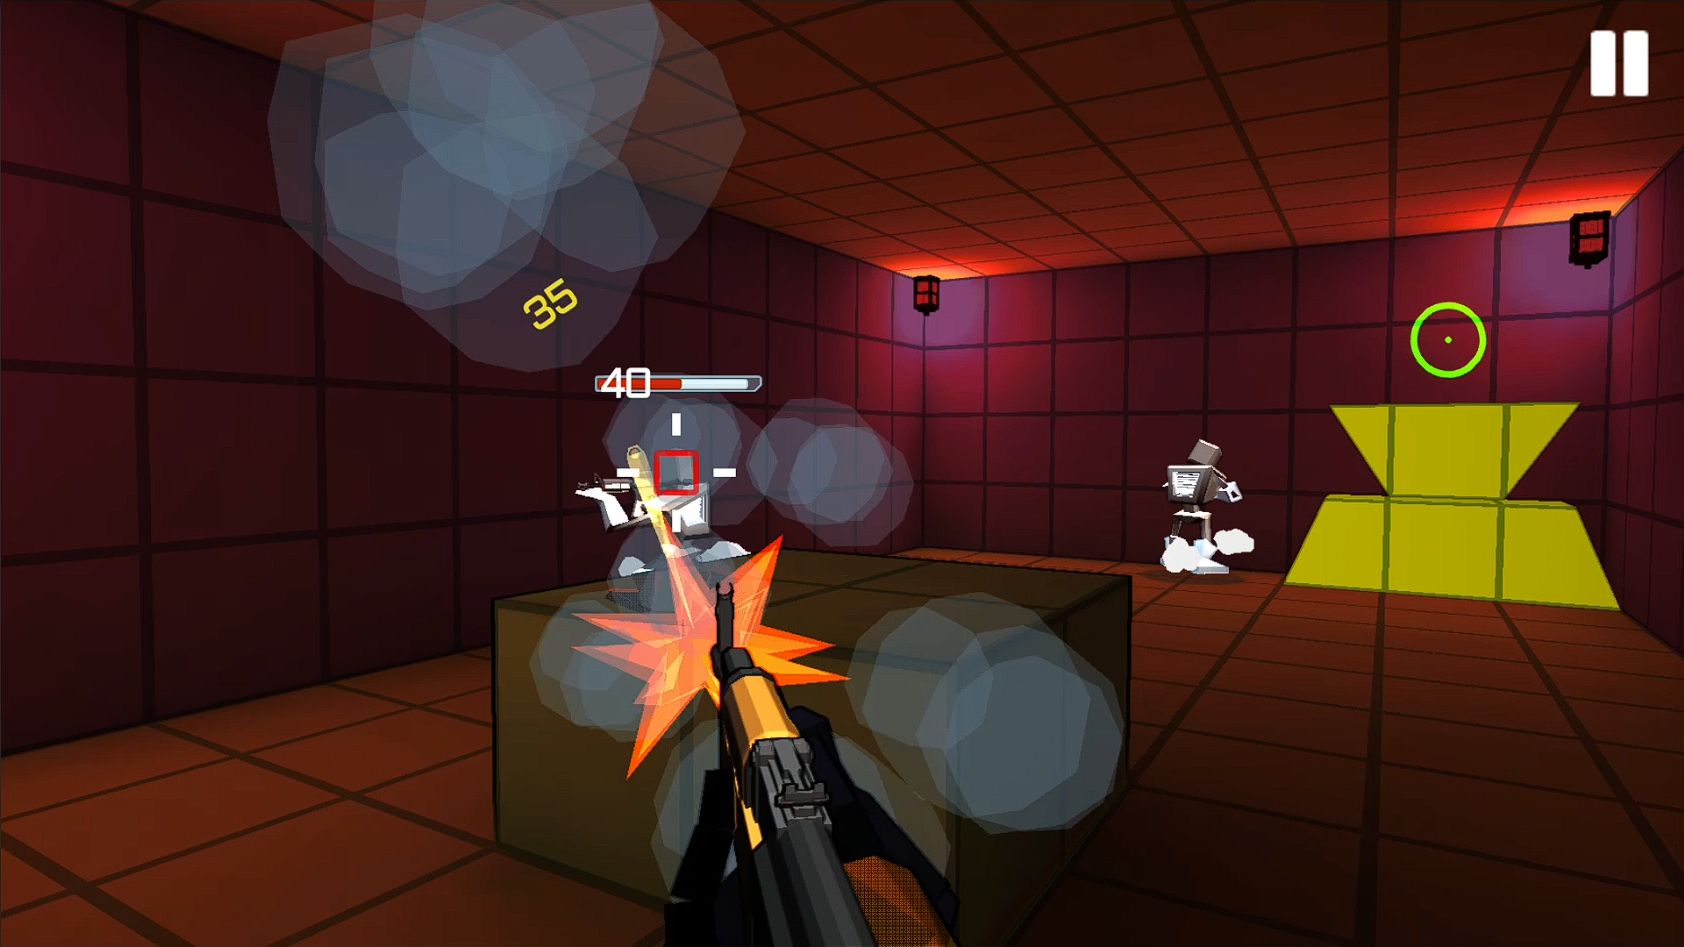 Full version of Android apk app Netlooter - The auto-aim FPS for tablet and phone.